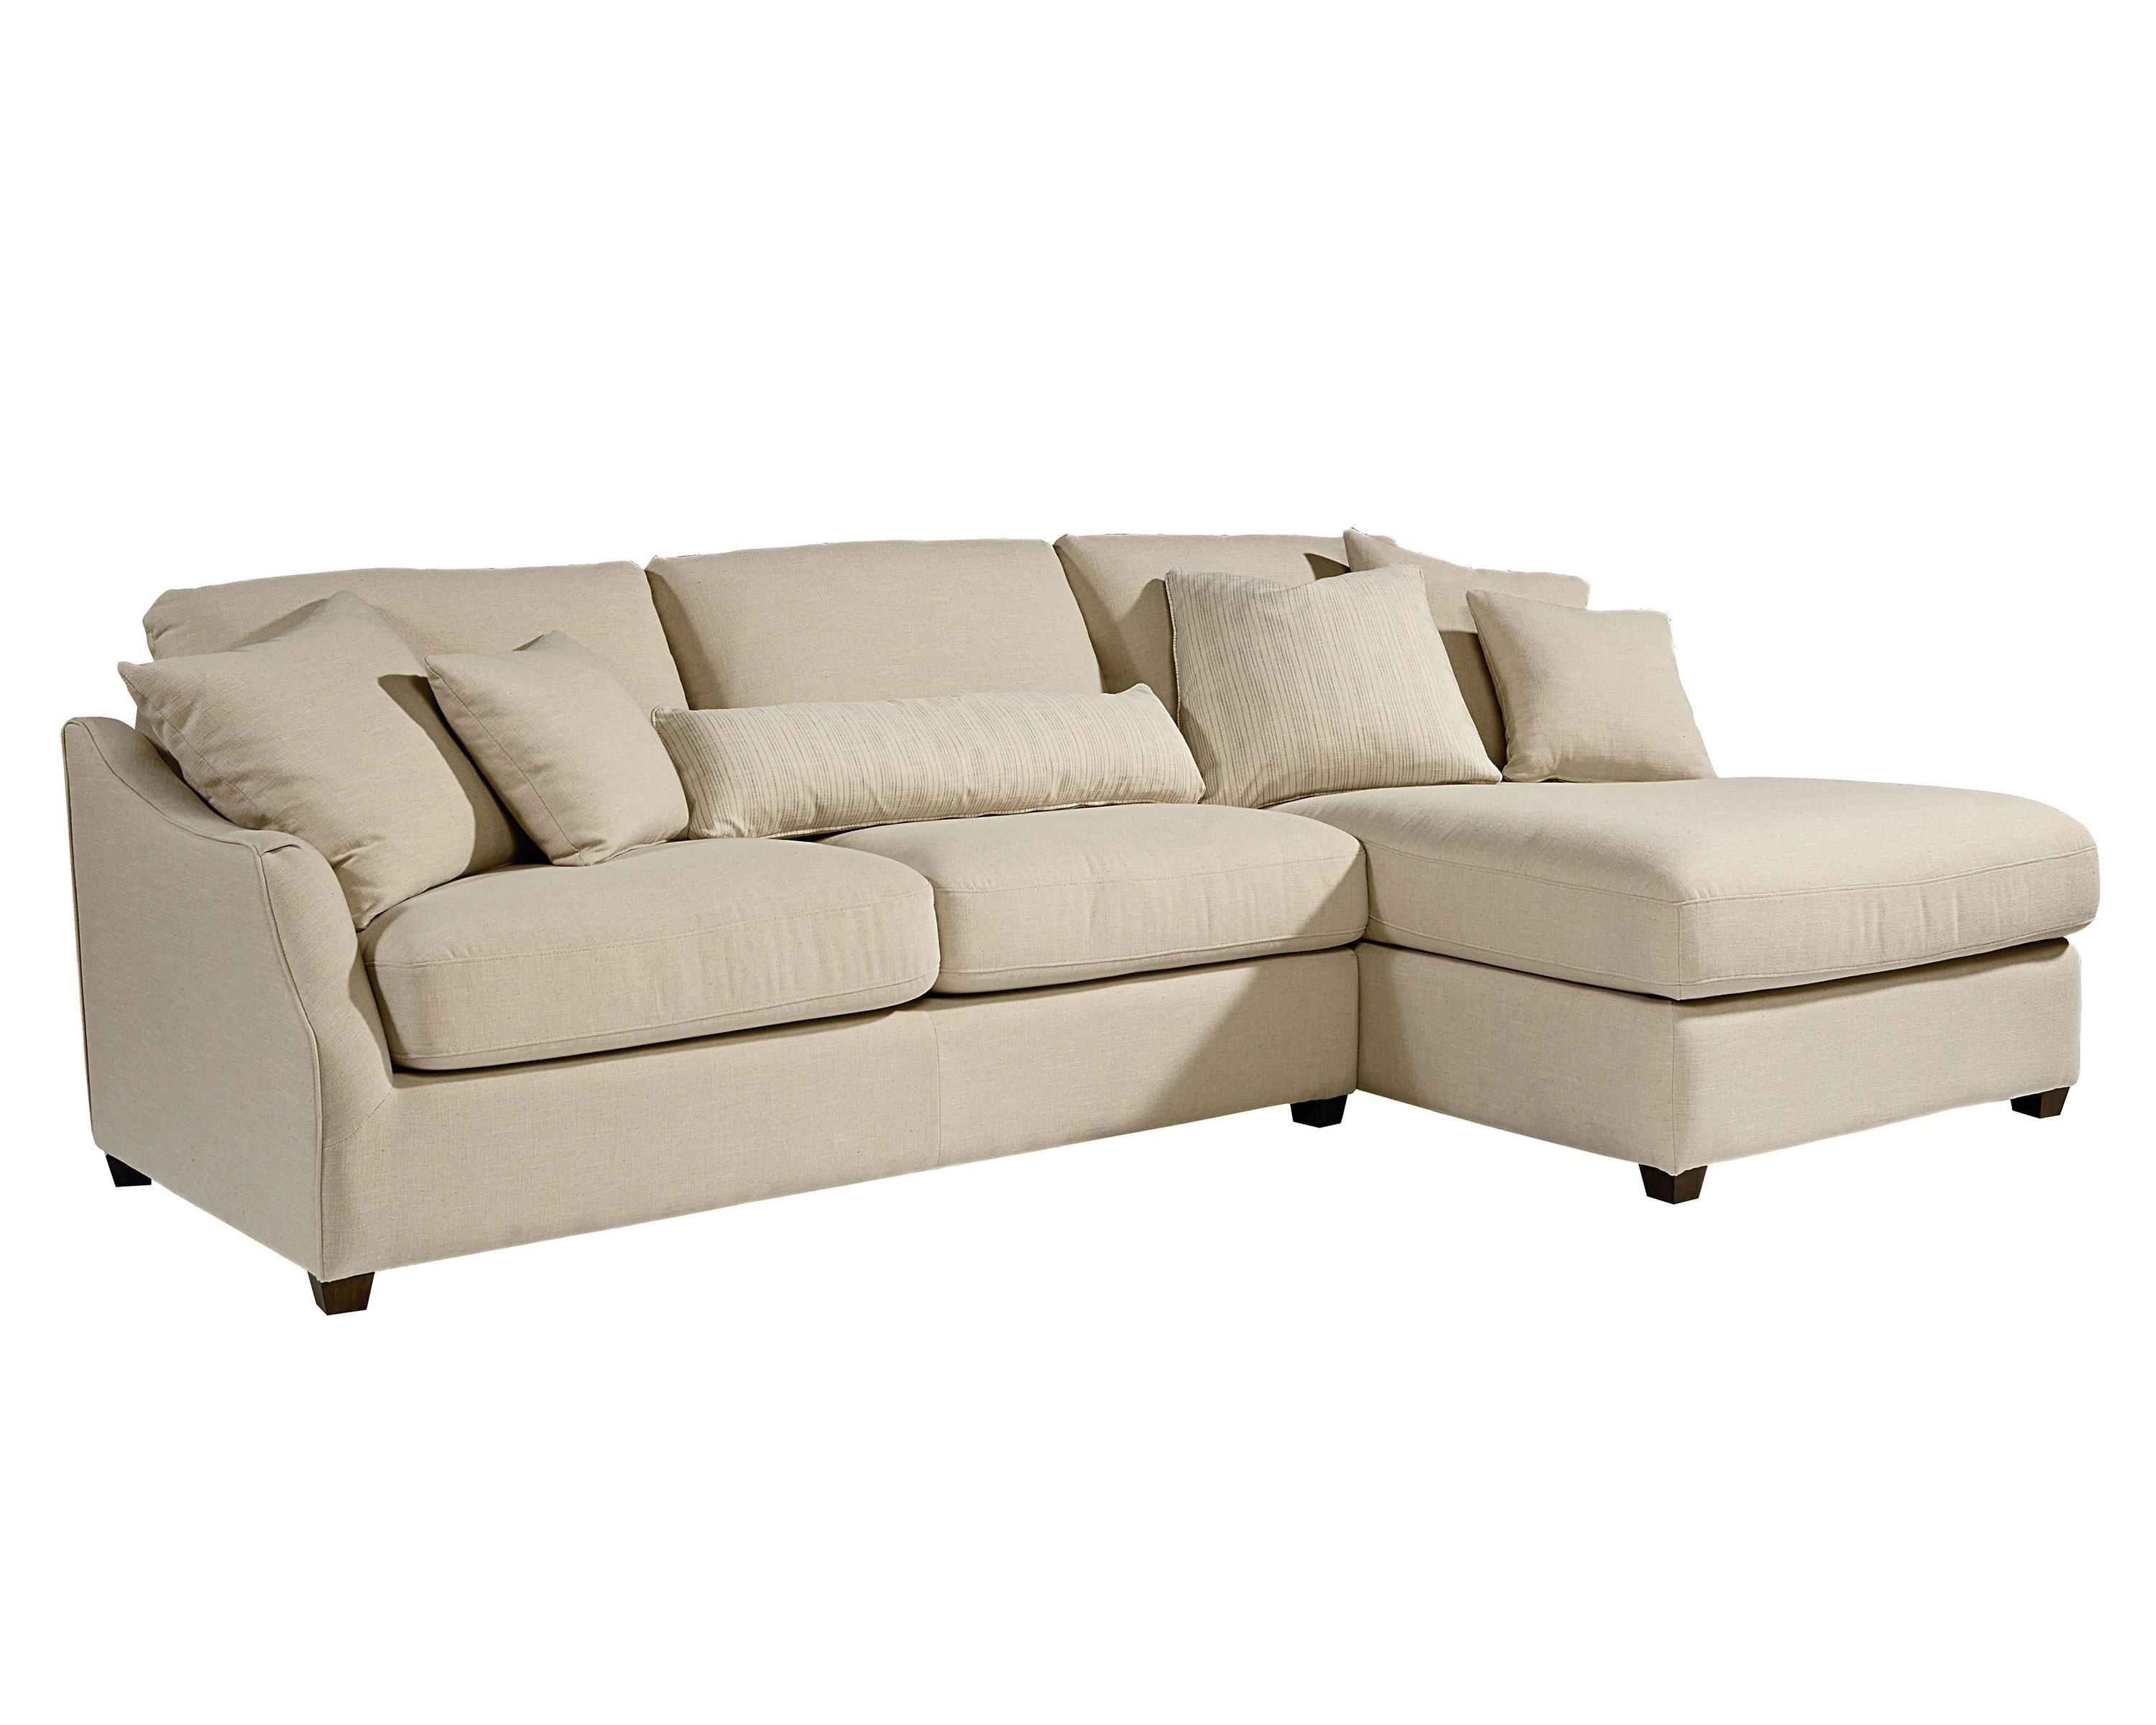 Homestead Chaise Sofa – Magnolia Home For Magnolia Home Homestead 4 Piece Sectionals By Joanna Gaines (View 4 of 30)